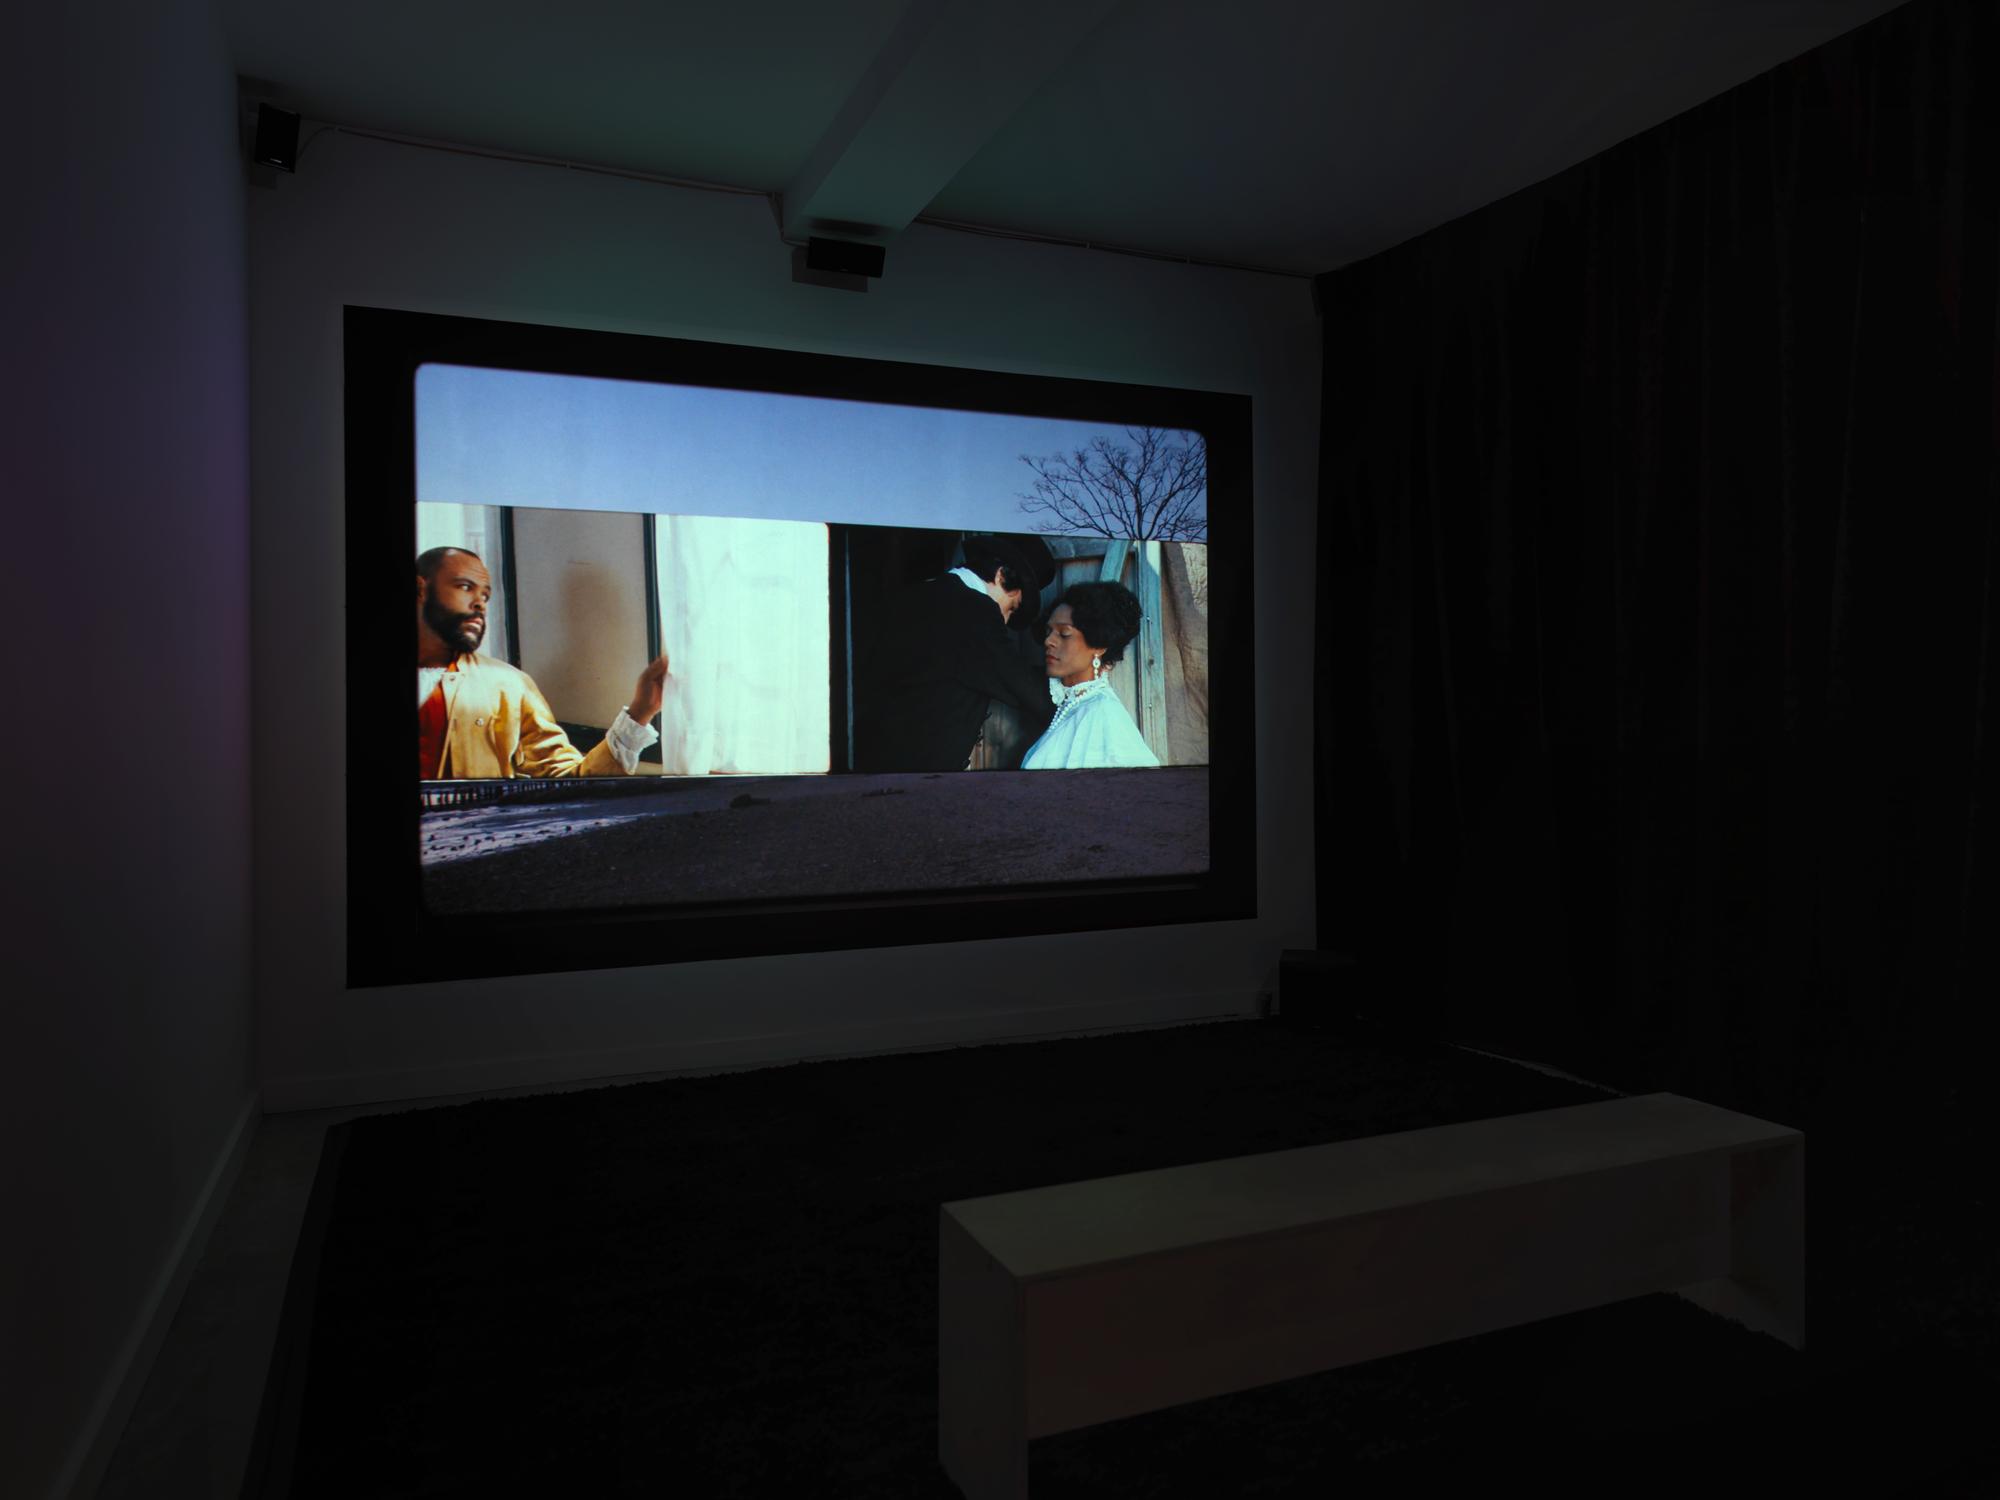 This installation view of Salacia depicts a scene with a man on the left and the portrayal of Mary Jones on the right. They are looking toward each other but it is unclear if they are in the same room.